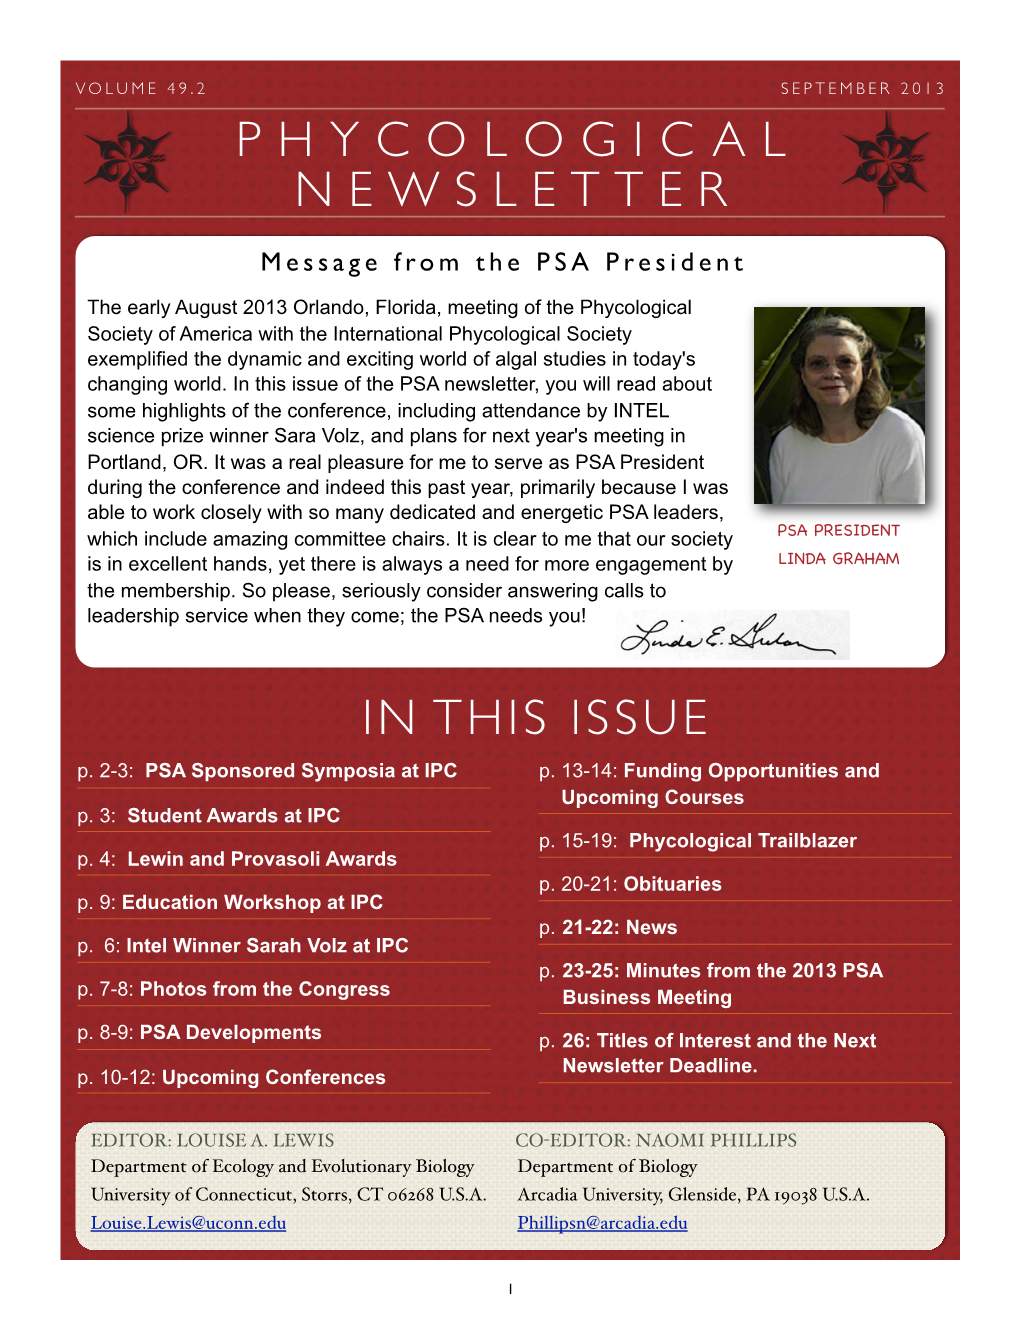 Phycological Newsletter in This Issue